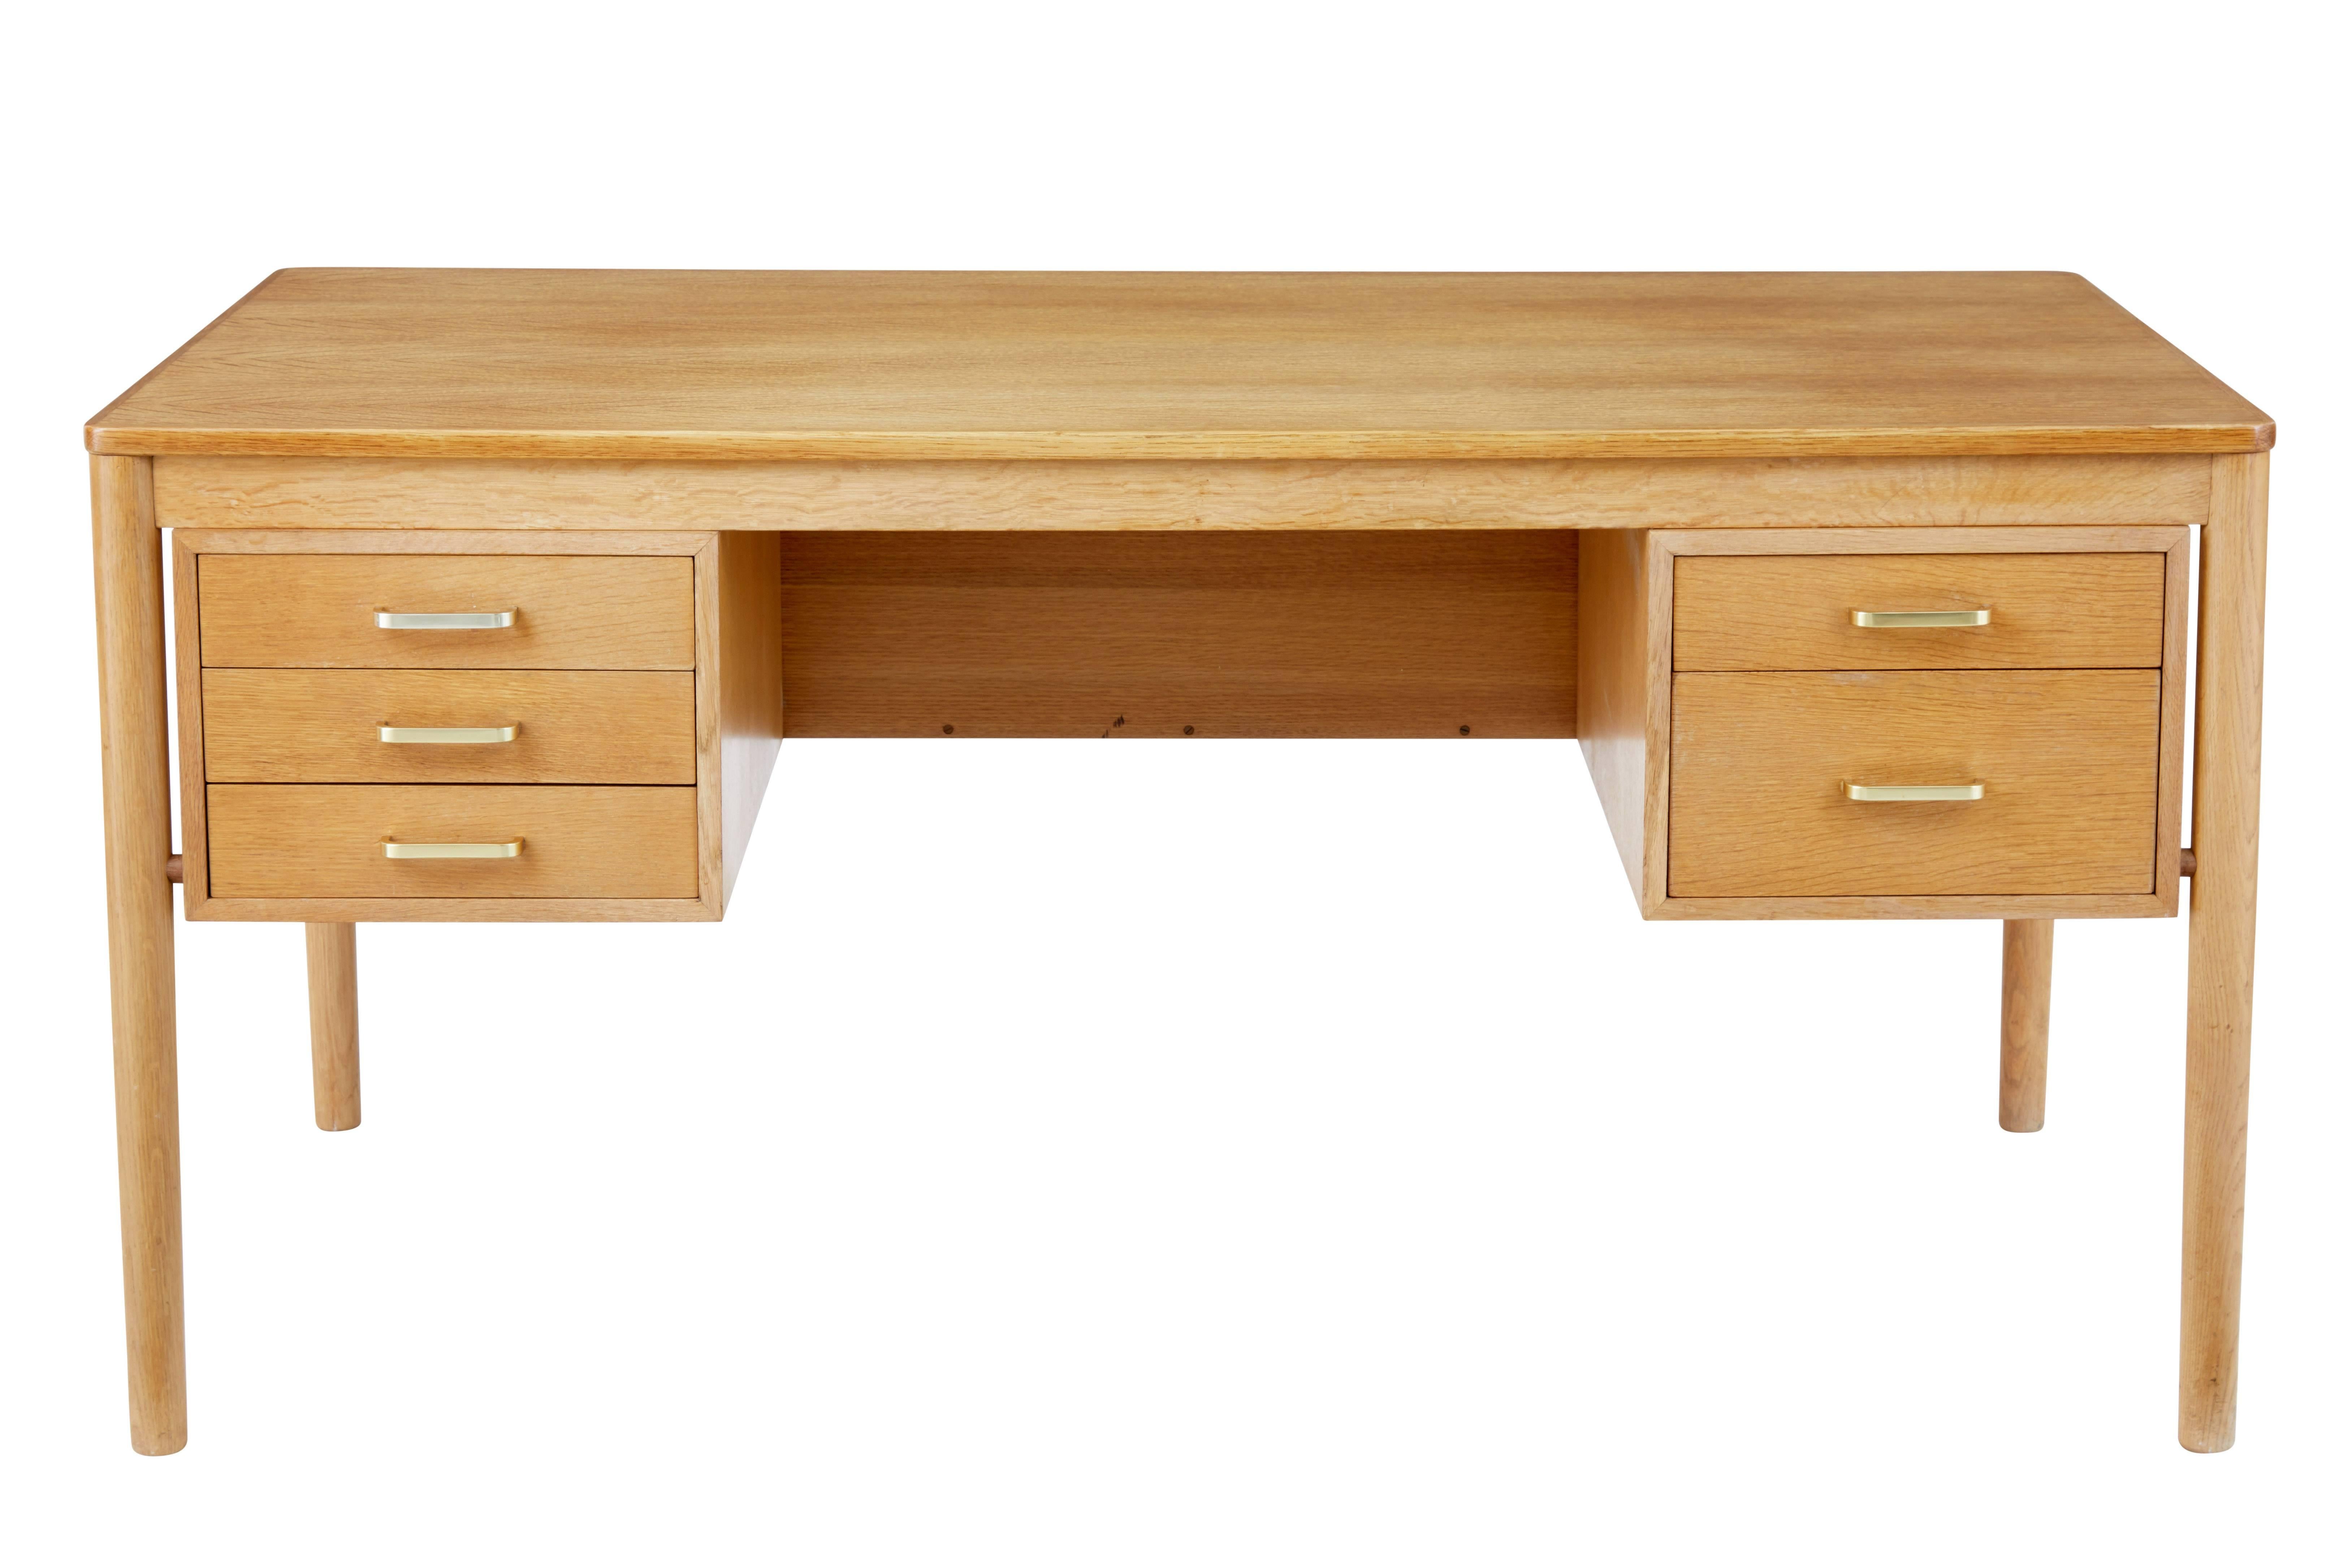 Scandinavian design desk from the late 1960s.

Bank of threee drawers to the left of the knee hole and two drawers to the right. Exposed rounded legs which allow the main structure to appear as its floating.

Book storage to the reverse divided